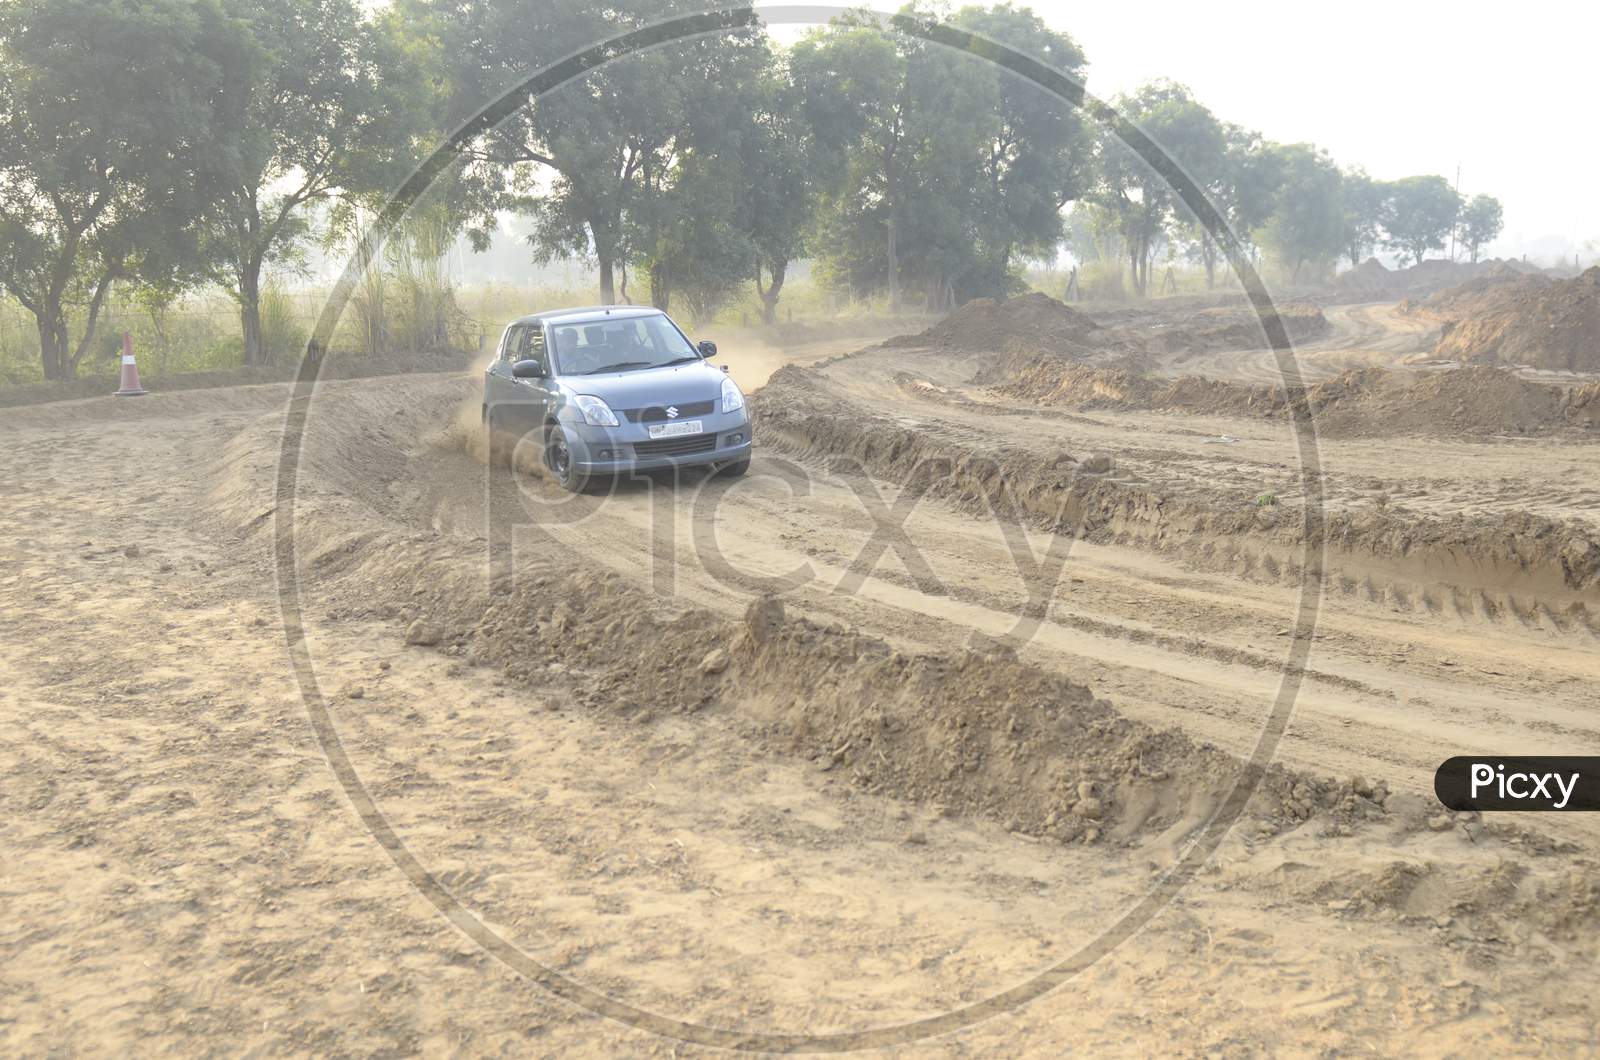 Maruthi Suzuki Swift  Car Or  Off-Road Vehicle  in an Rally Championship  With Drifting And Sand and Soil  Splashes on Rally Tracks